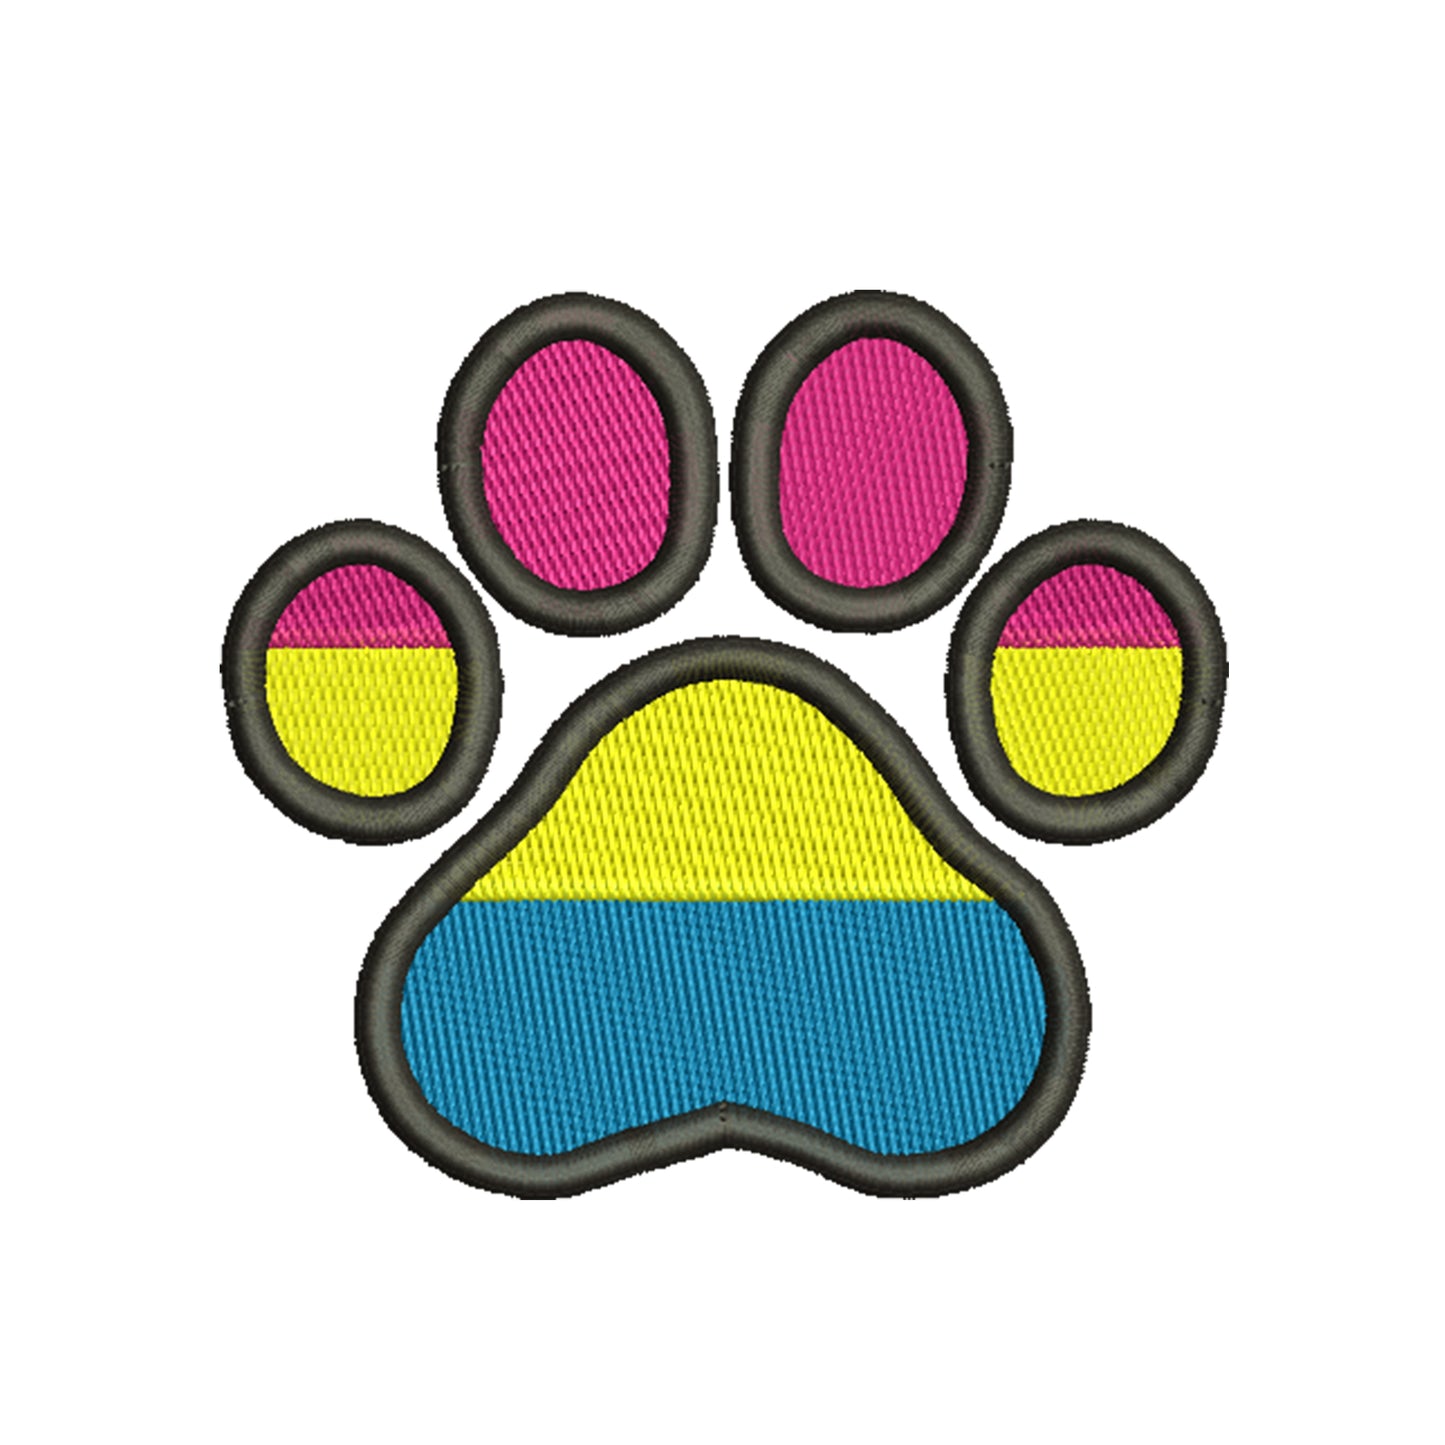 Paw embroidery designs pansexual pride flag - 1010044